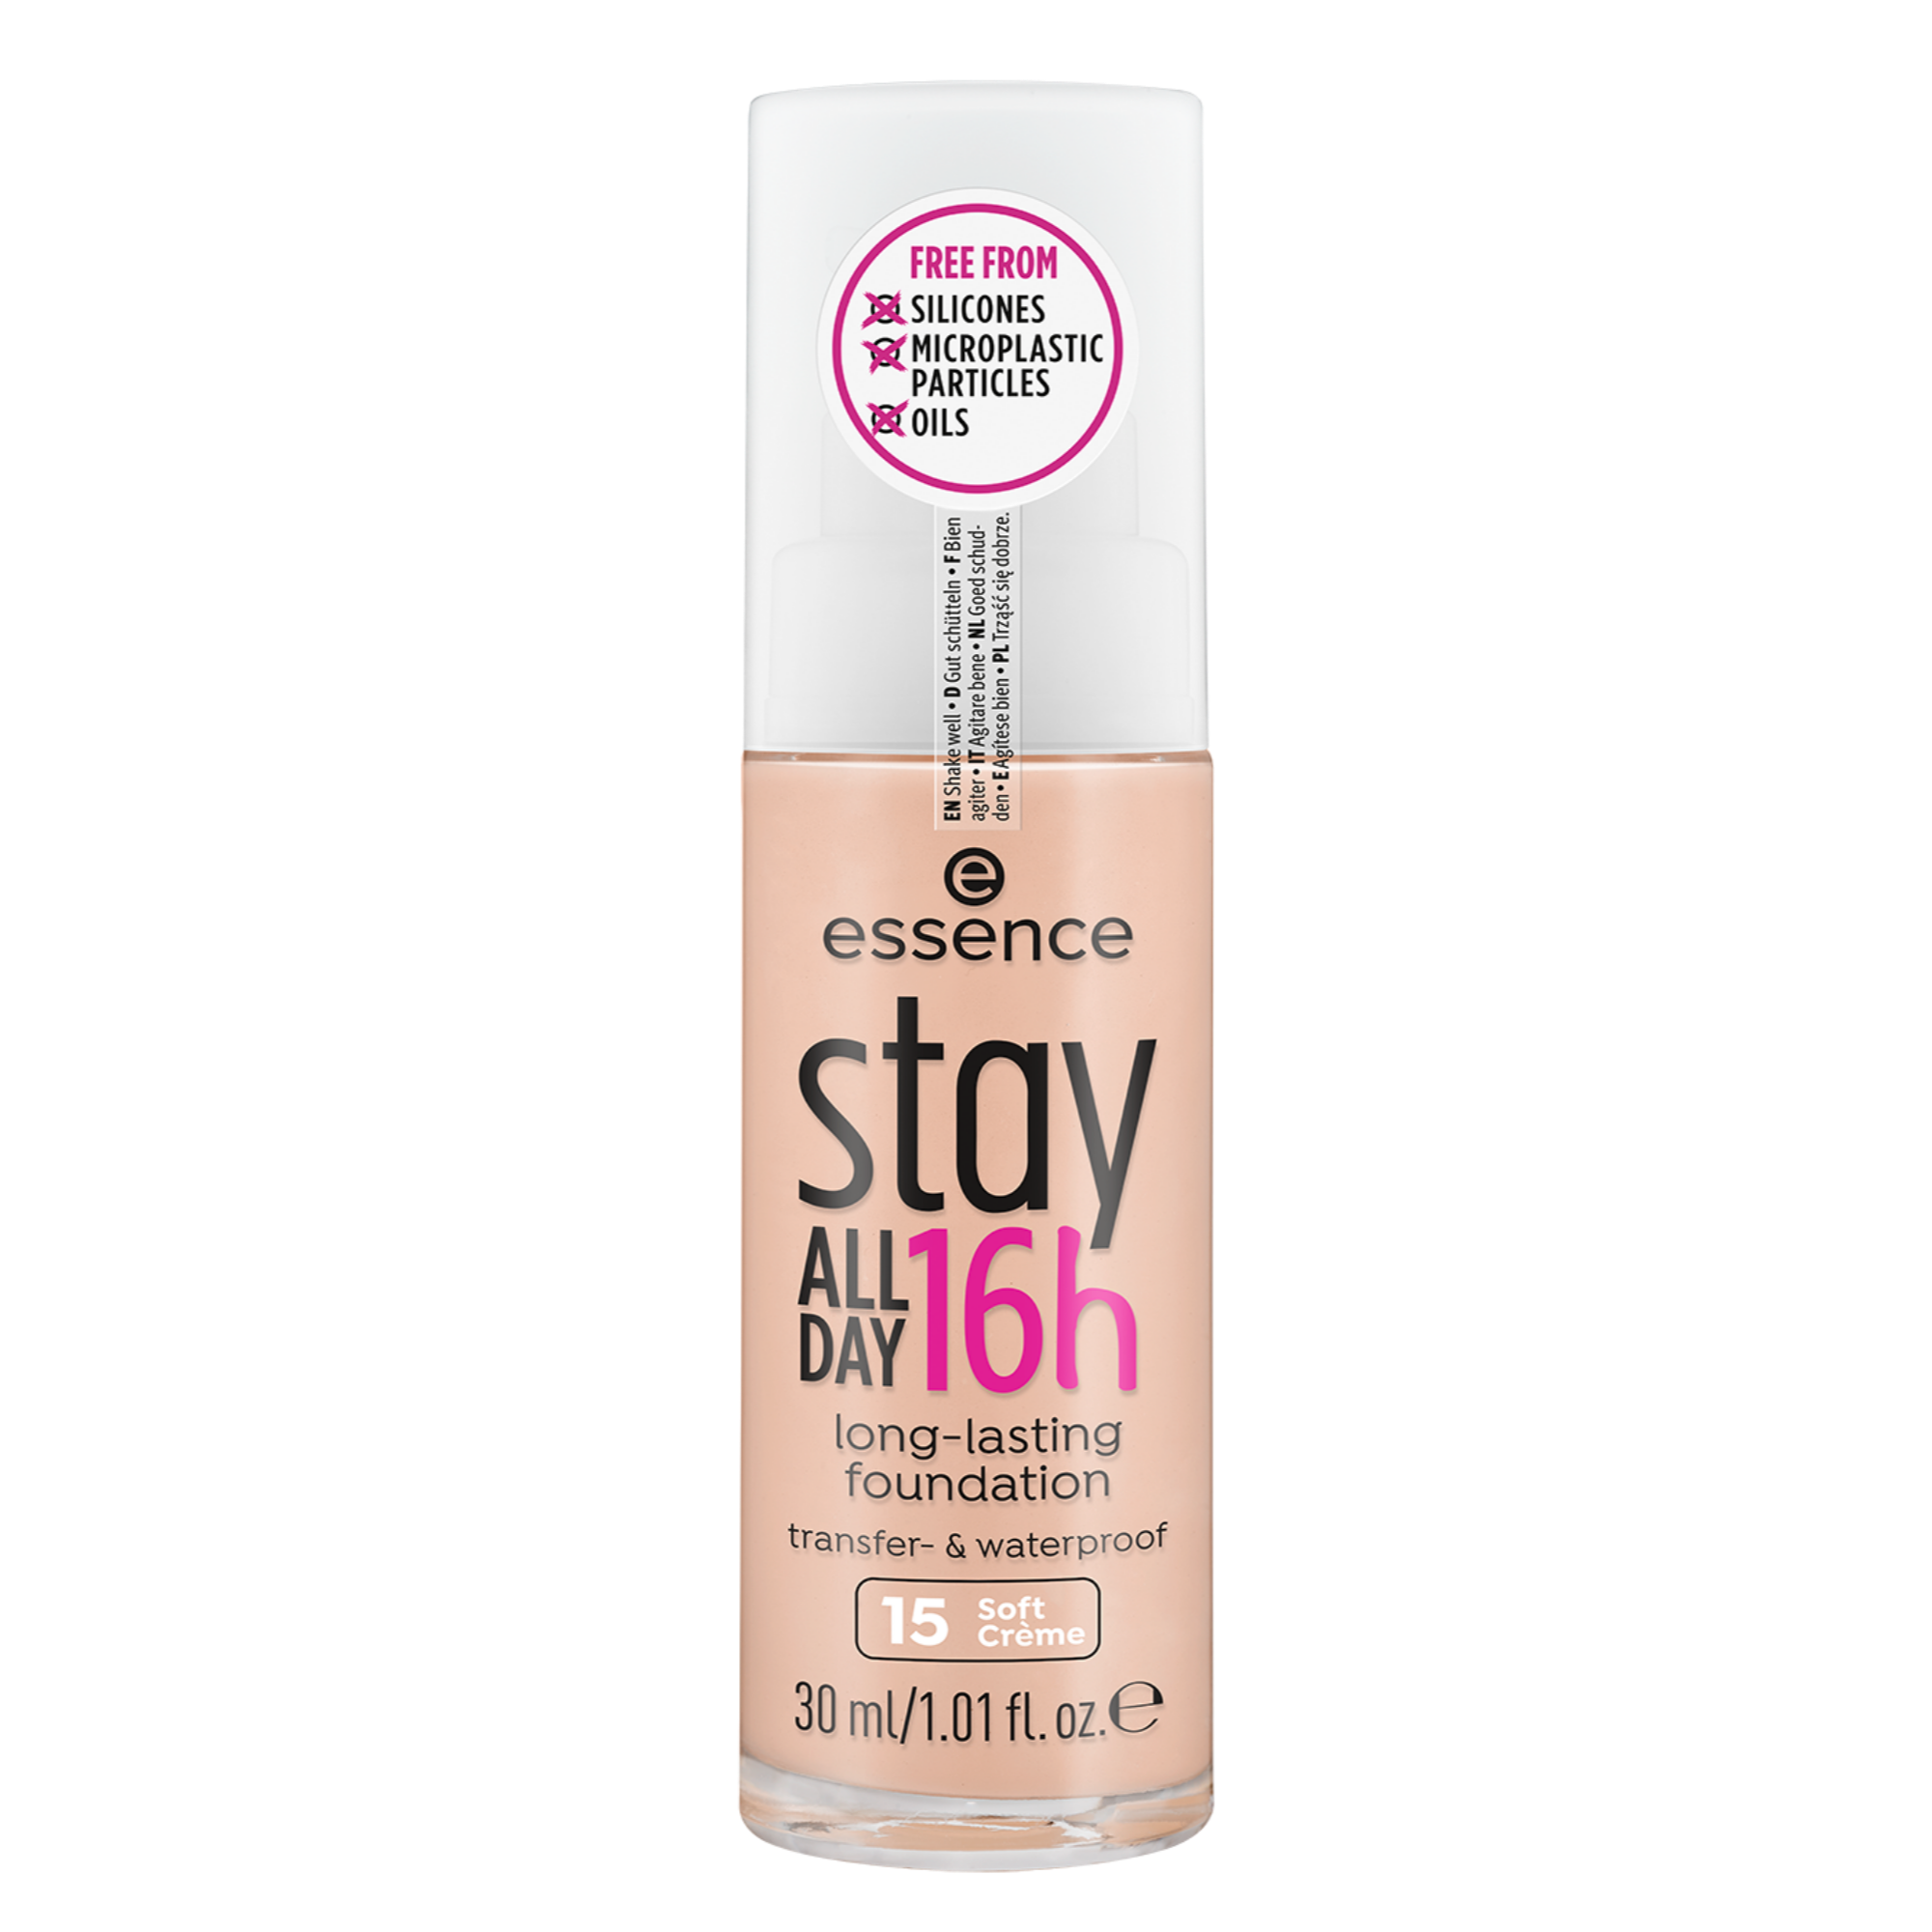 stay ALL DAY 16h long-lasting Foundation